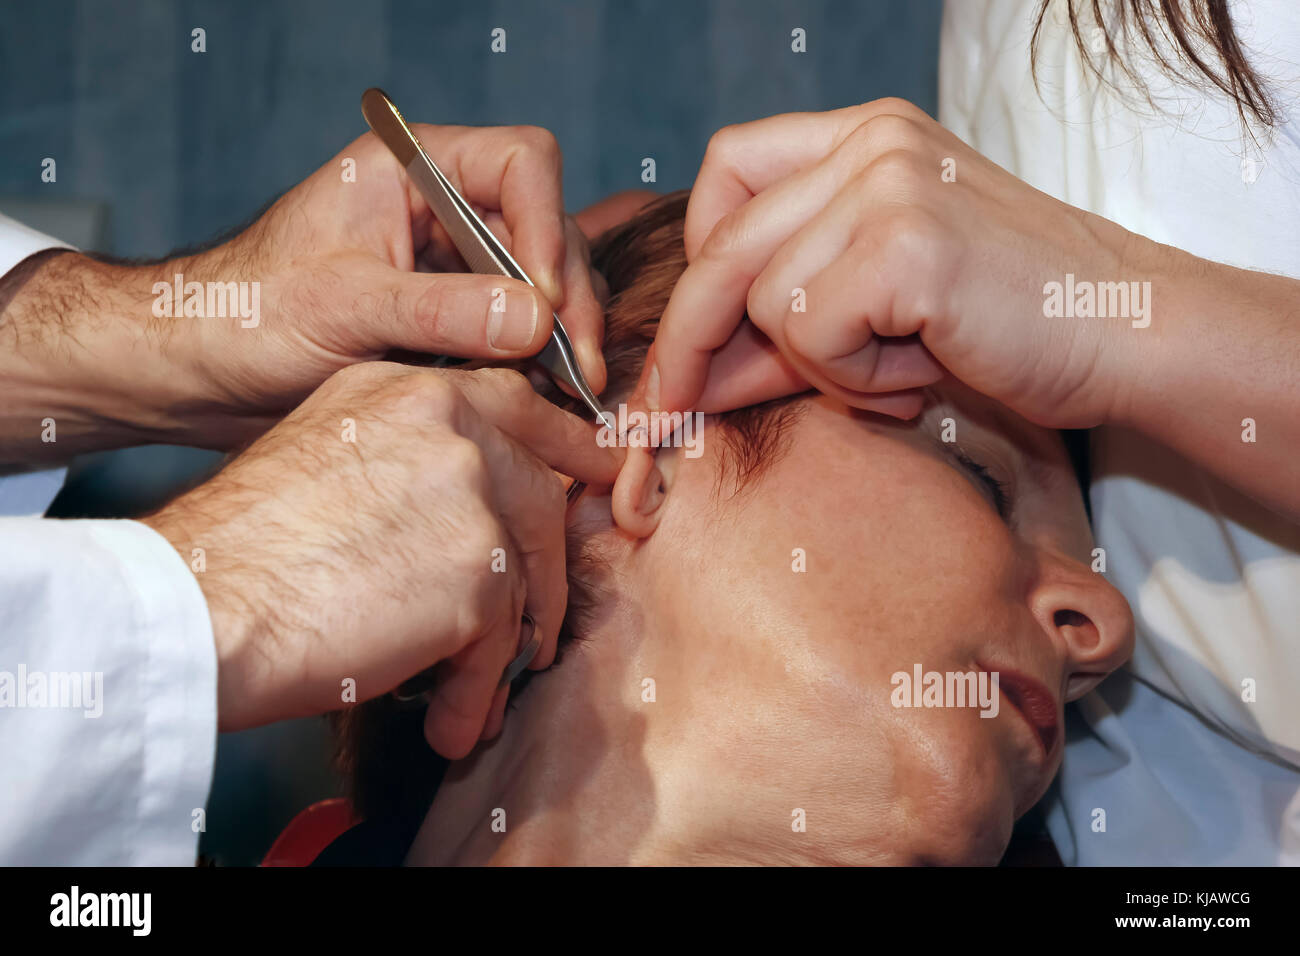 Stitches being removed from a patient's ear. Stock Photo